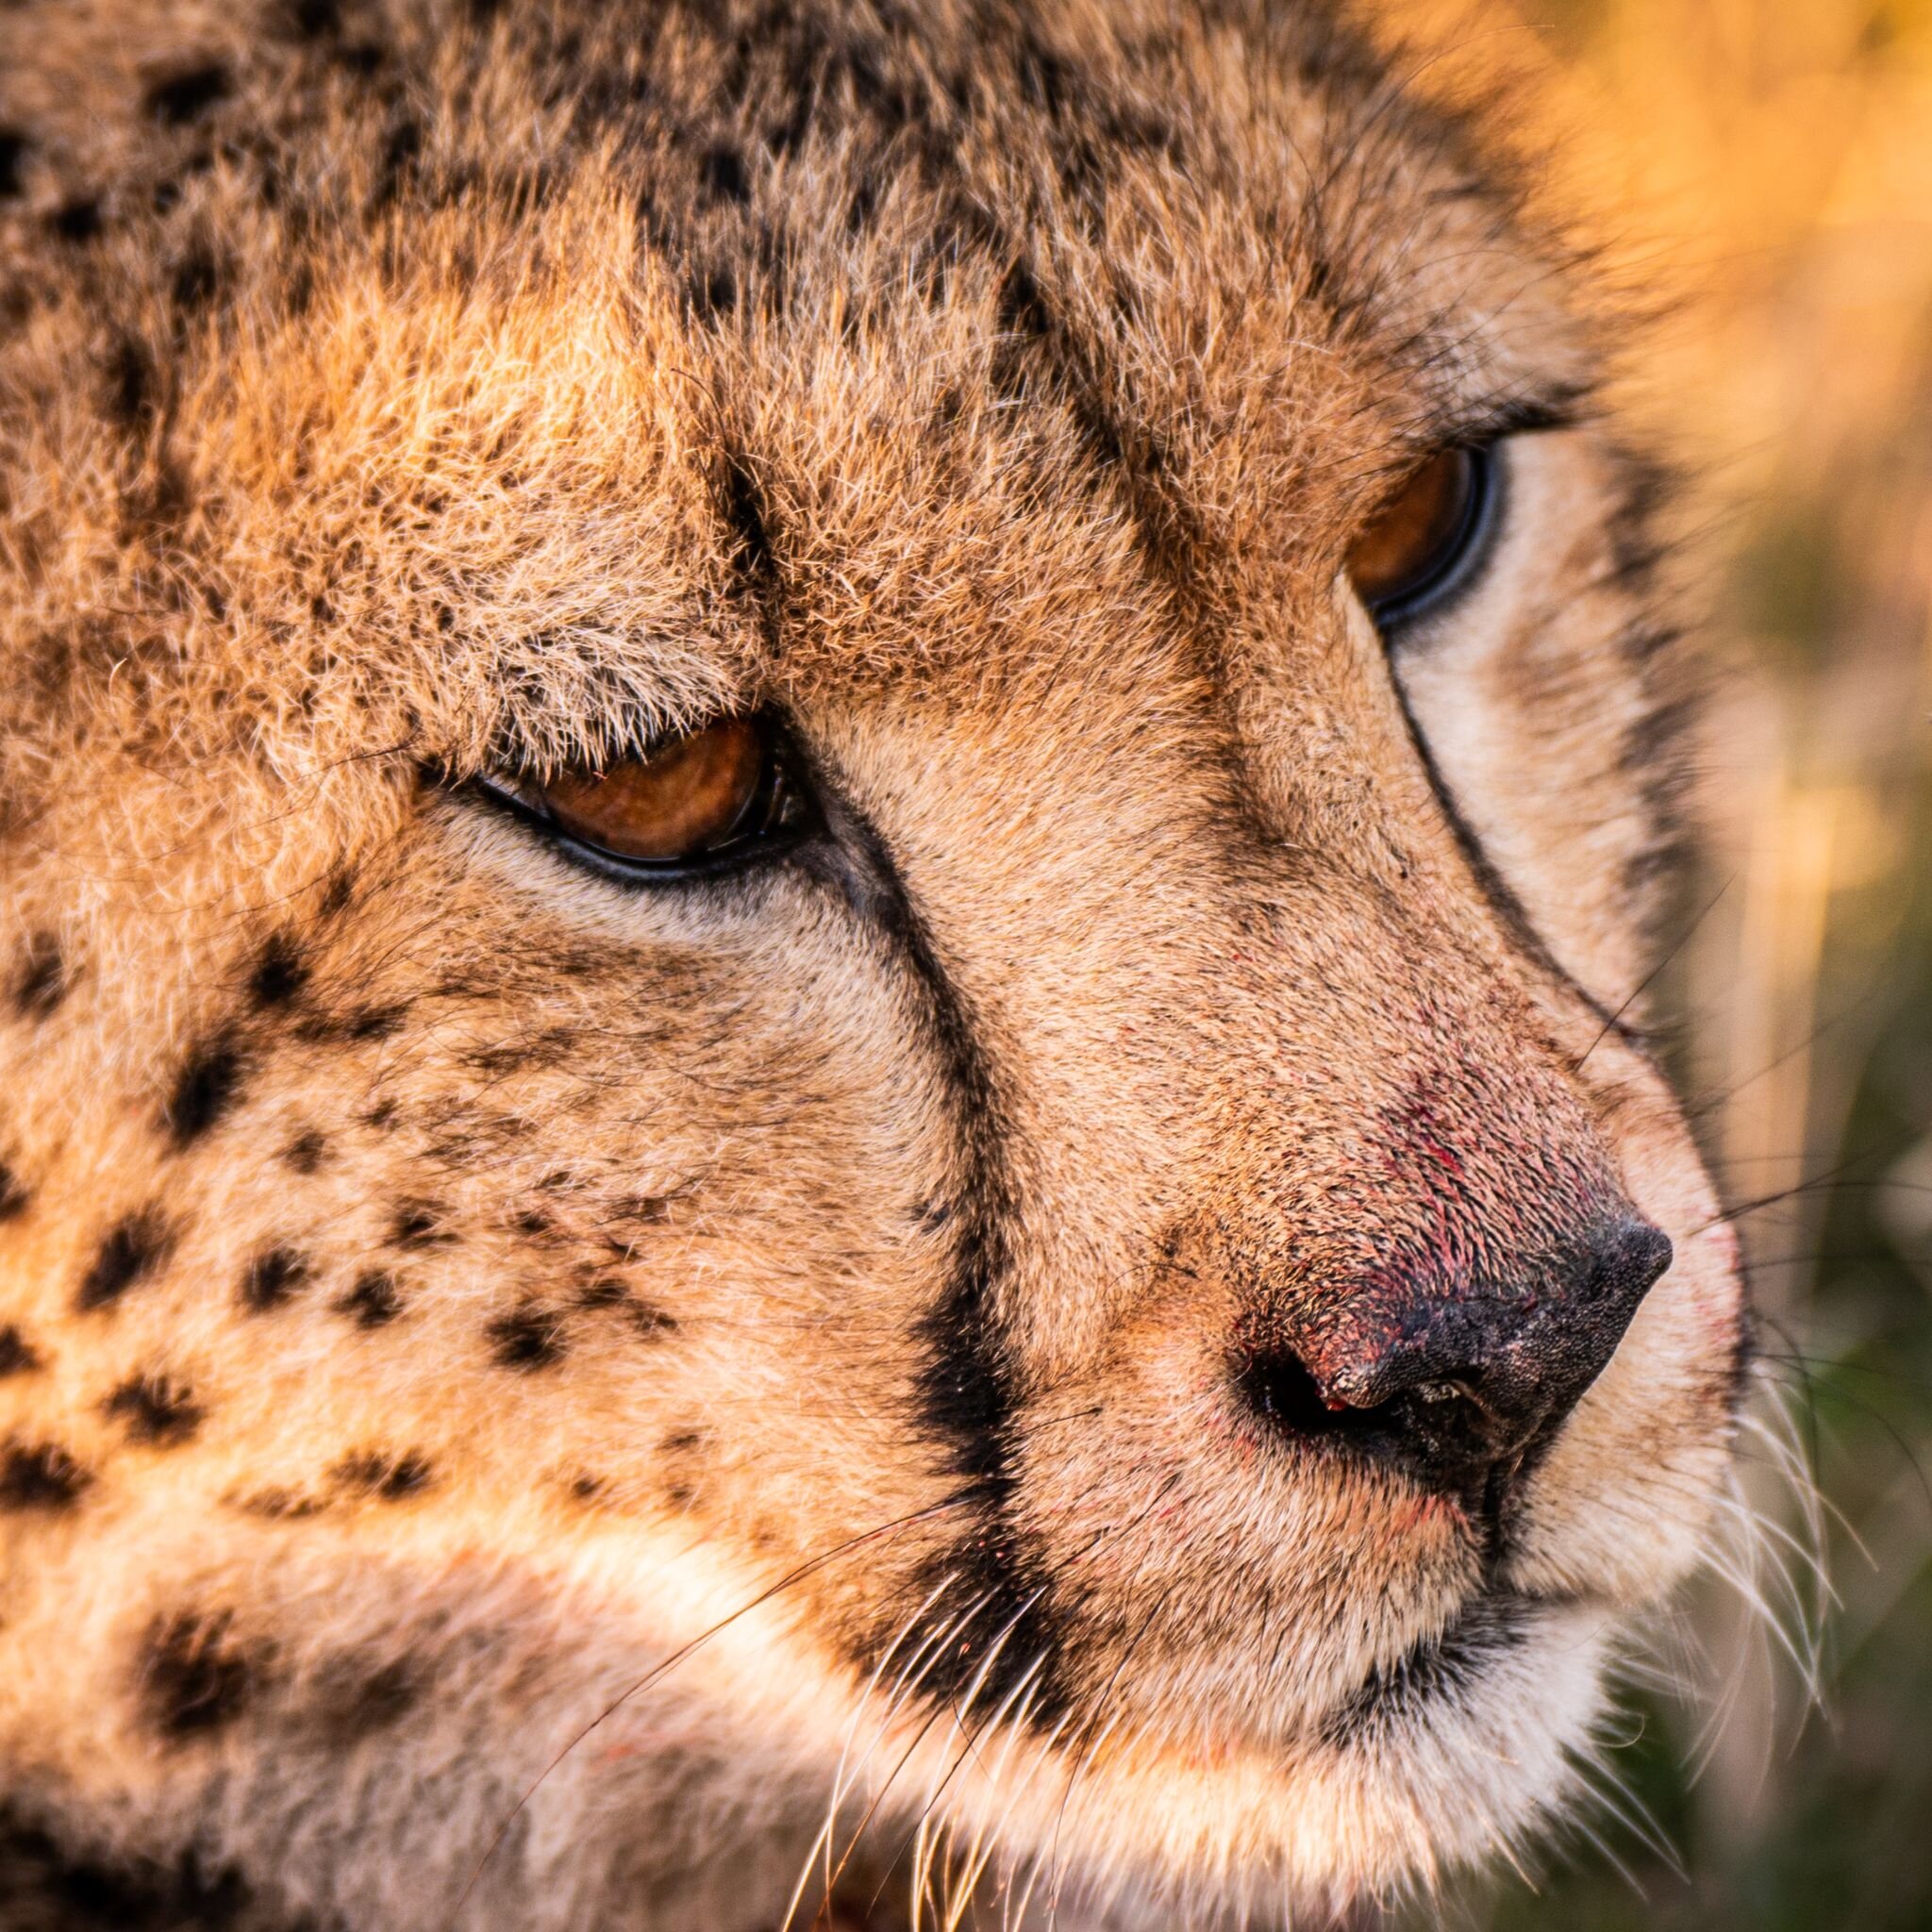 Smell Sense

Cheetahs tend to rely on stalking and chasing their prey at close range, rather than using scent to track over long distances. Their burst of speed and agility make them very effective hunters.

📷 @gondwanagr @roy_roysky
#mywyldlife #my